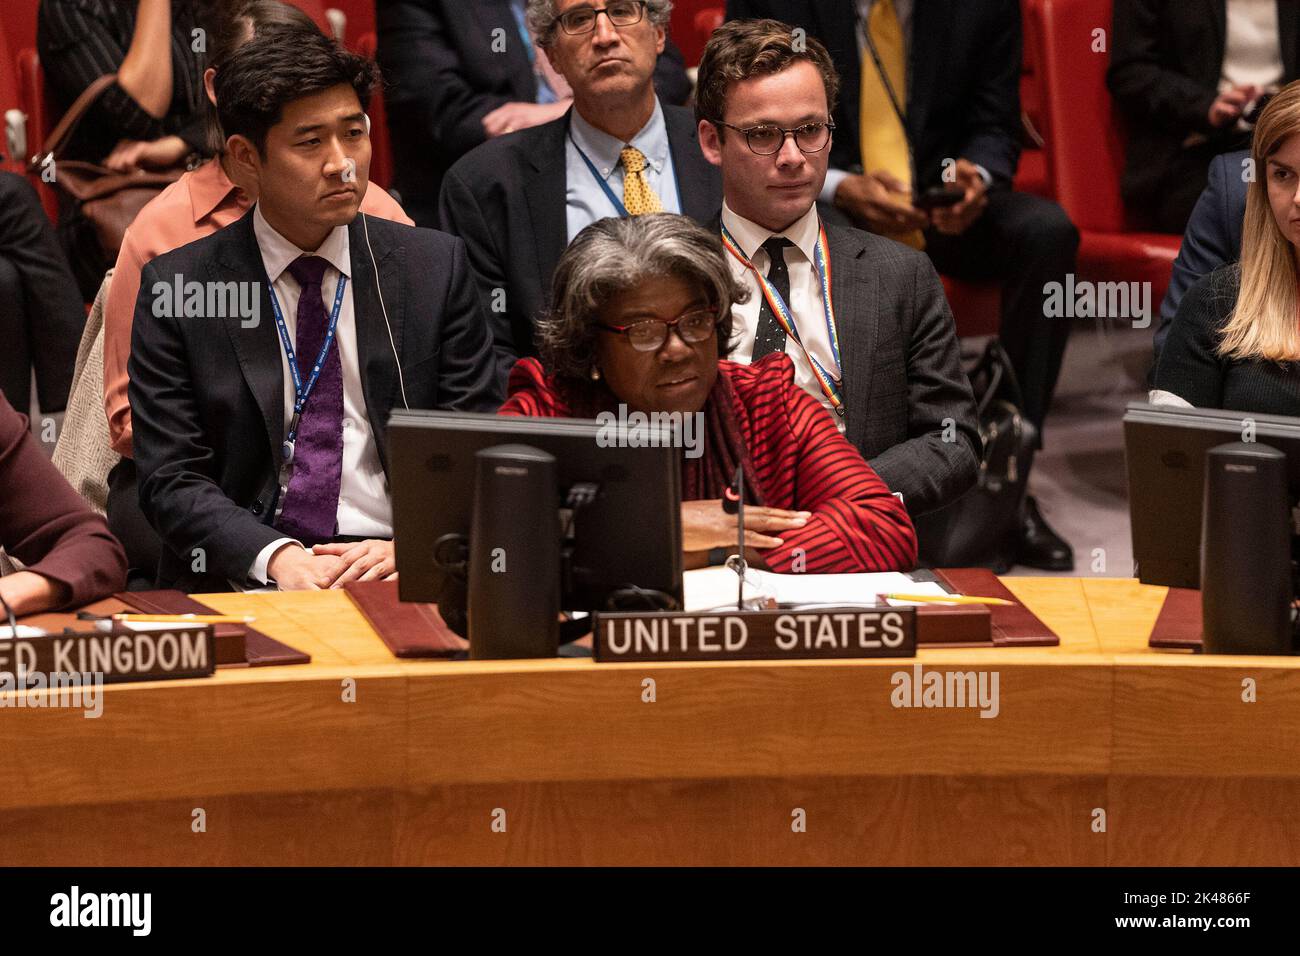 New York, New York, USA. 1st Oct, 2022. Ambassador of United States Linda Thomas-Greenfield speaks before Security Council voted on joint resolution to condemn Russian on annexation in UN Headquarters. The Security Council voted on a joint draft resolution condemning annexation by Russia of Ukrainian territory sized in the past 7 months of the war. 4 countries (China, Gabon, Brazil, India) abstained, Russia vetoed the resolution and the rest of SC members voted for. (Credit Image: © Lev Radin/Pacific Press via ZUMA Press Wire) Credit: ZUMA Press, Inc./Alamy Live News Stock Photo